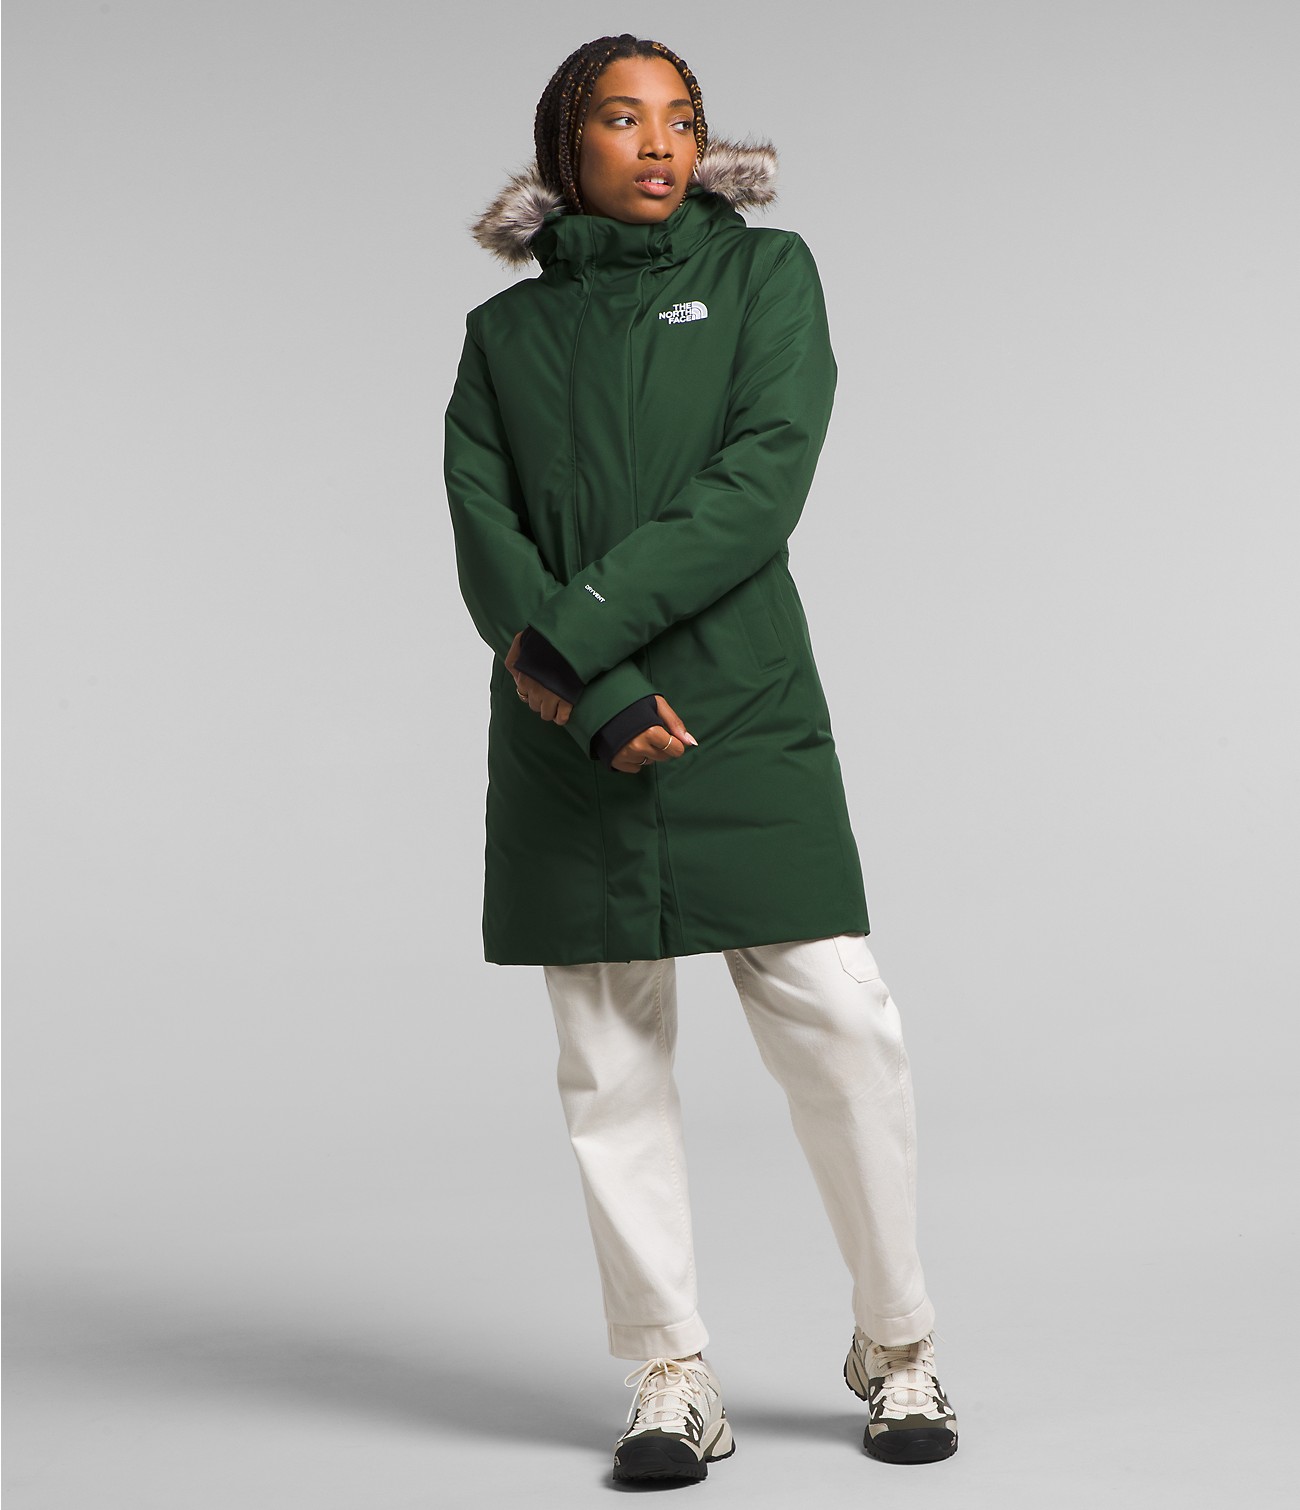 Women’s Arctic Parka | The North Face